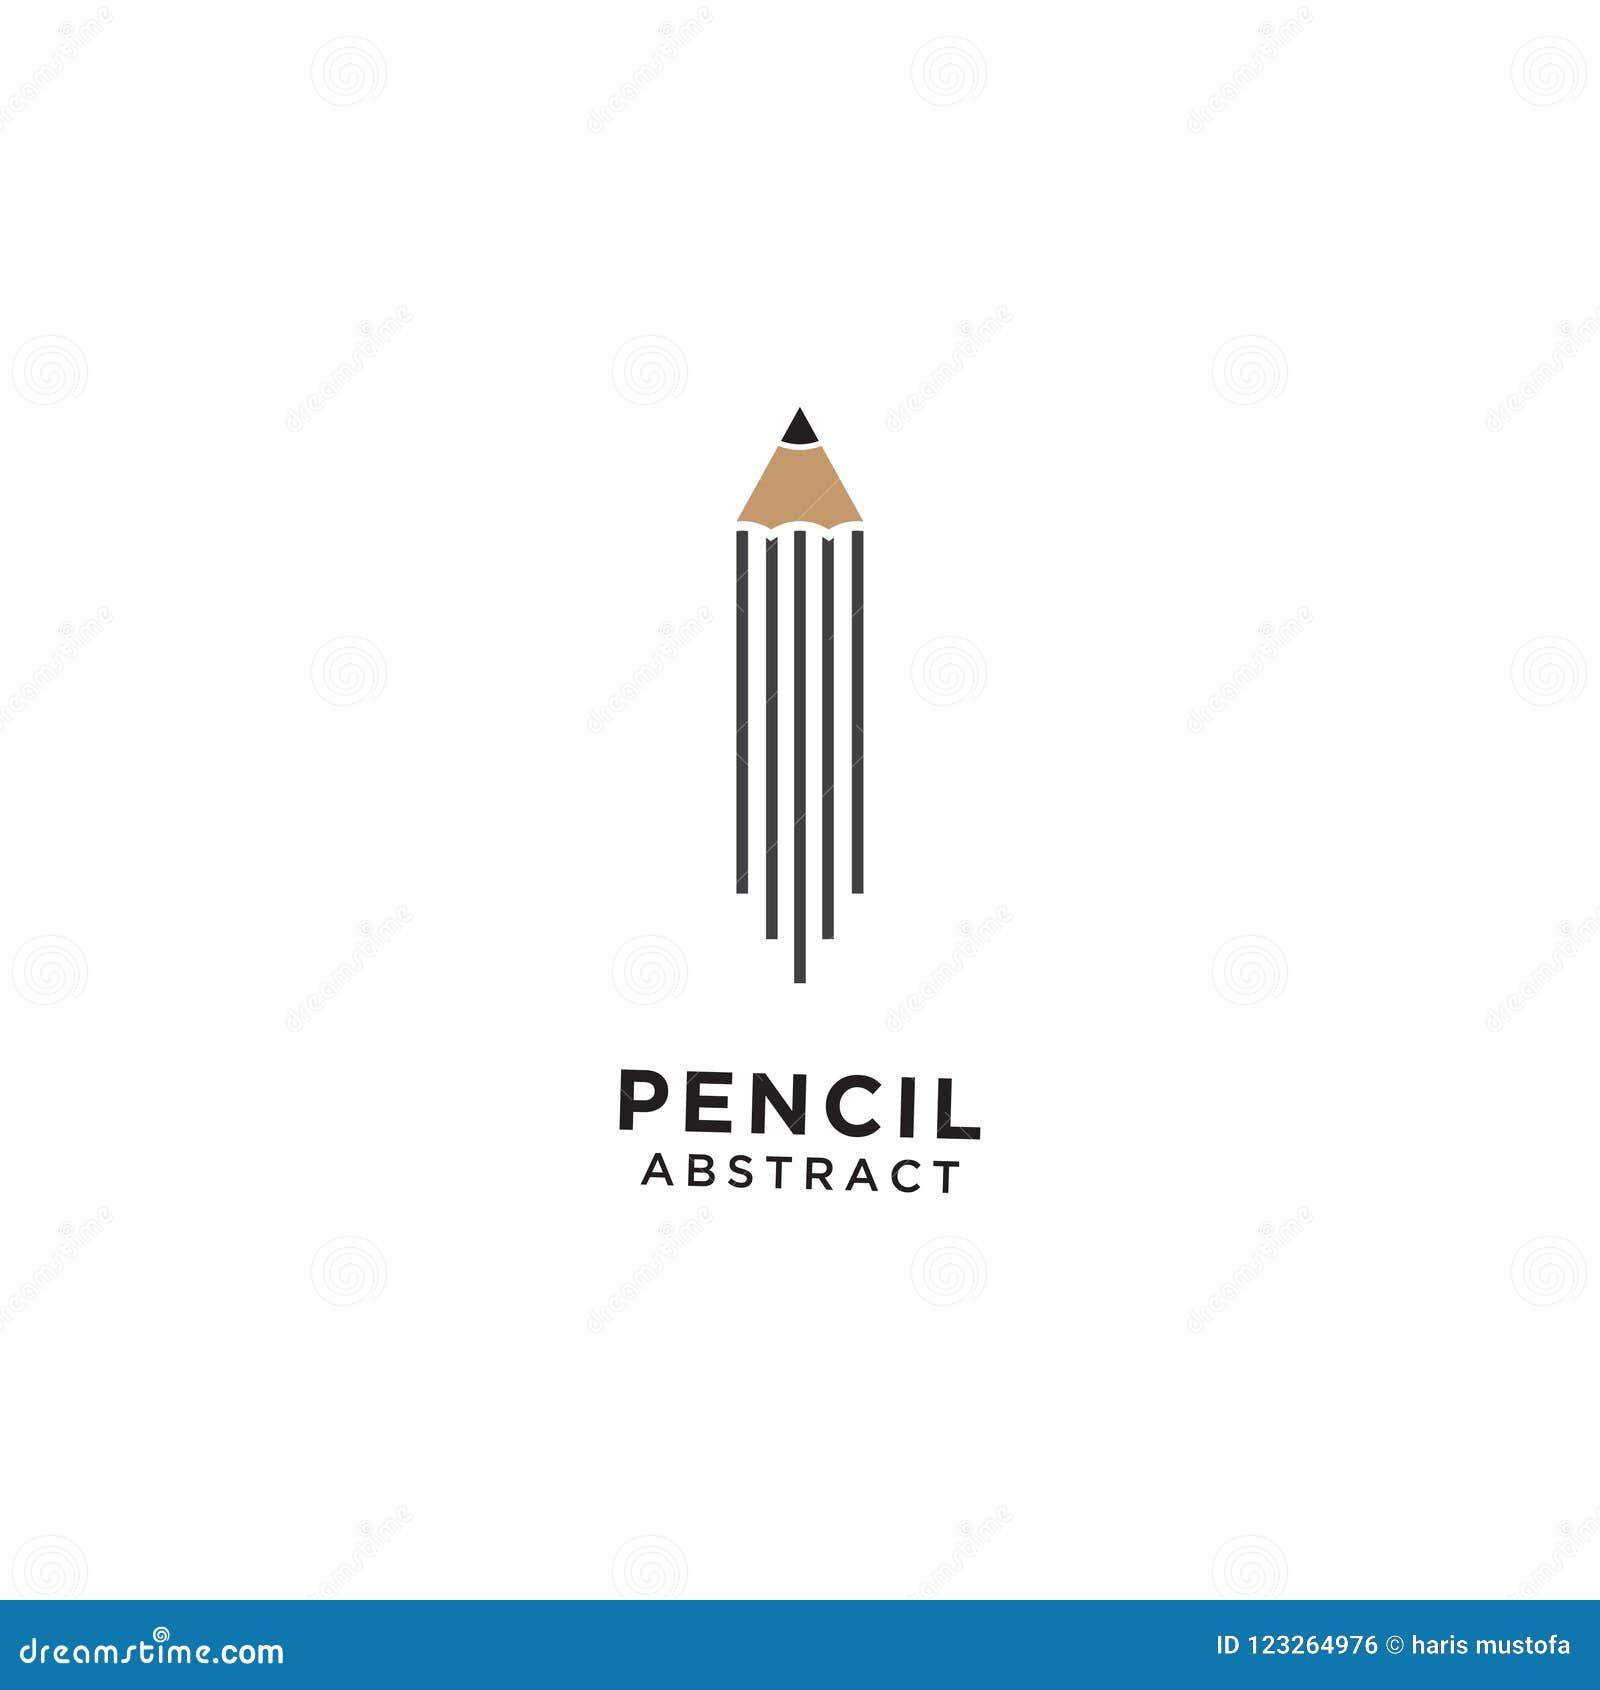 Illustration of Abstract Pencil Graphic Design Stock Vector ...